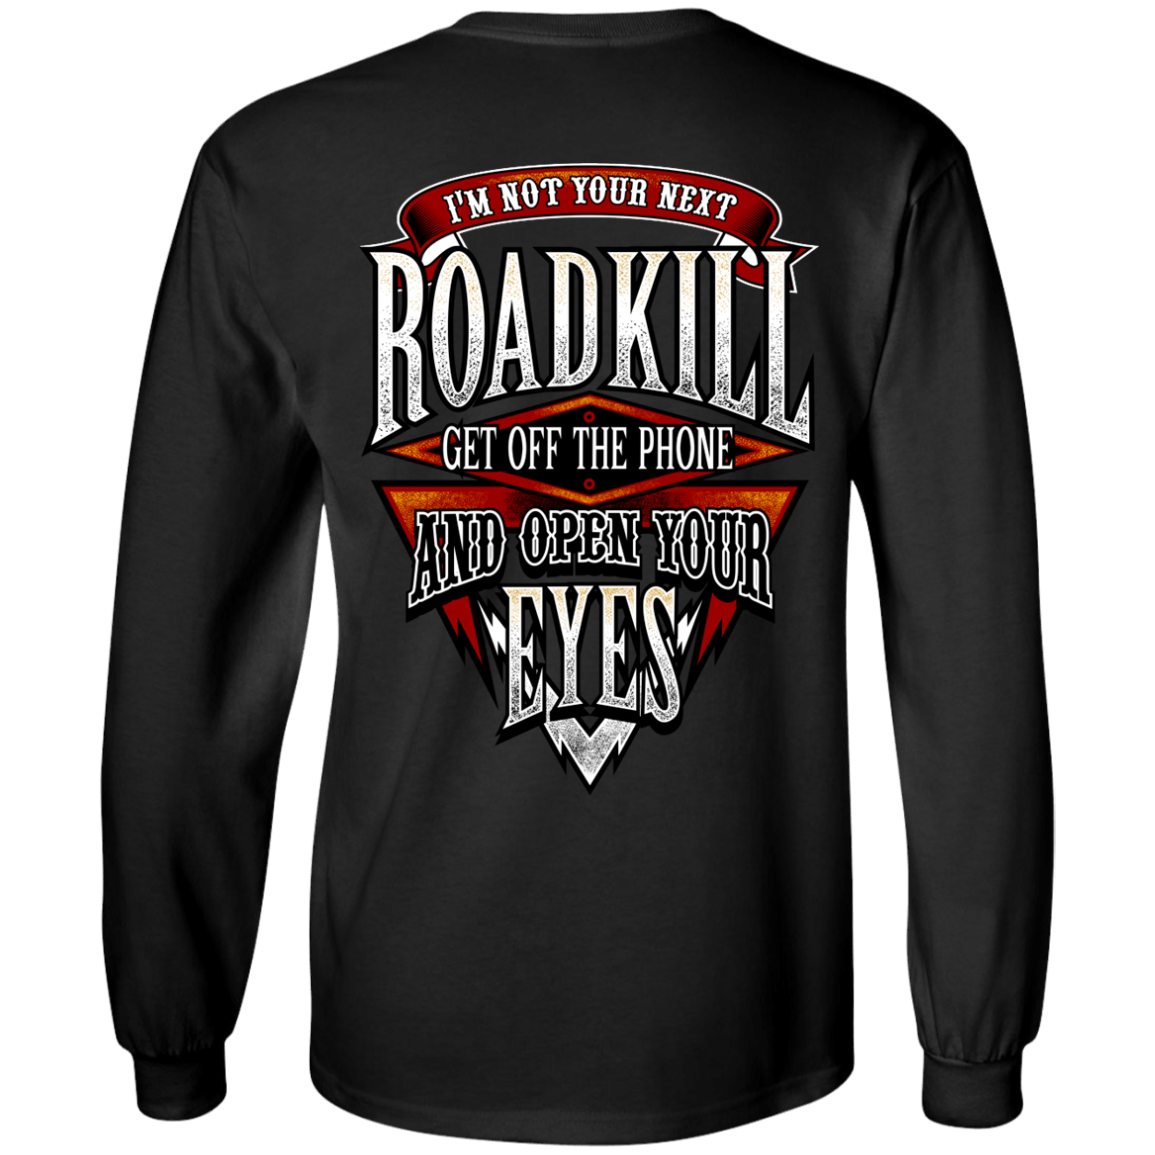 This attractive print long sleeve tee features high-quality cotton, perfect for I'm Not Your Next Roadkill Get Off The Phone And Open Your Eyes T-Shirts & Hoodie enthusiasts.